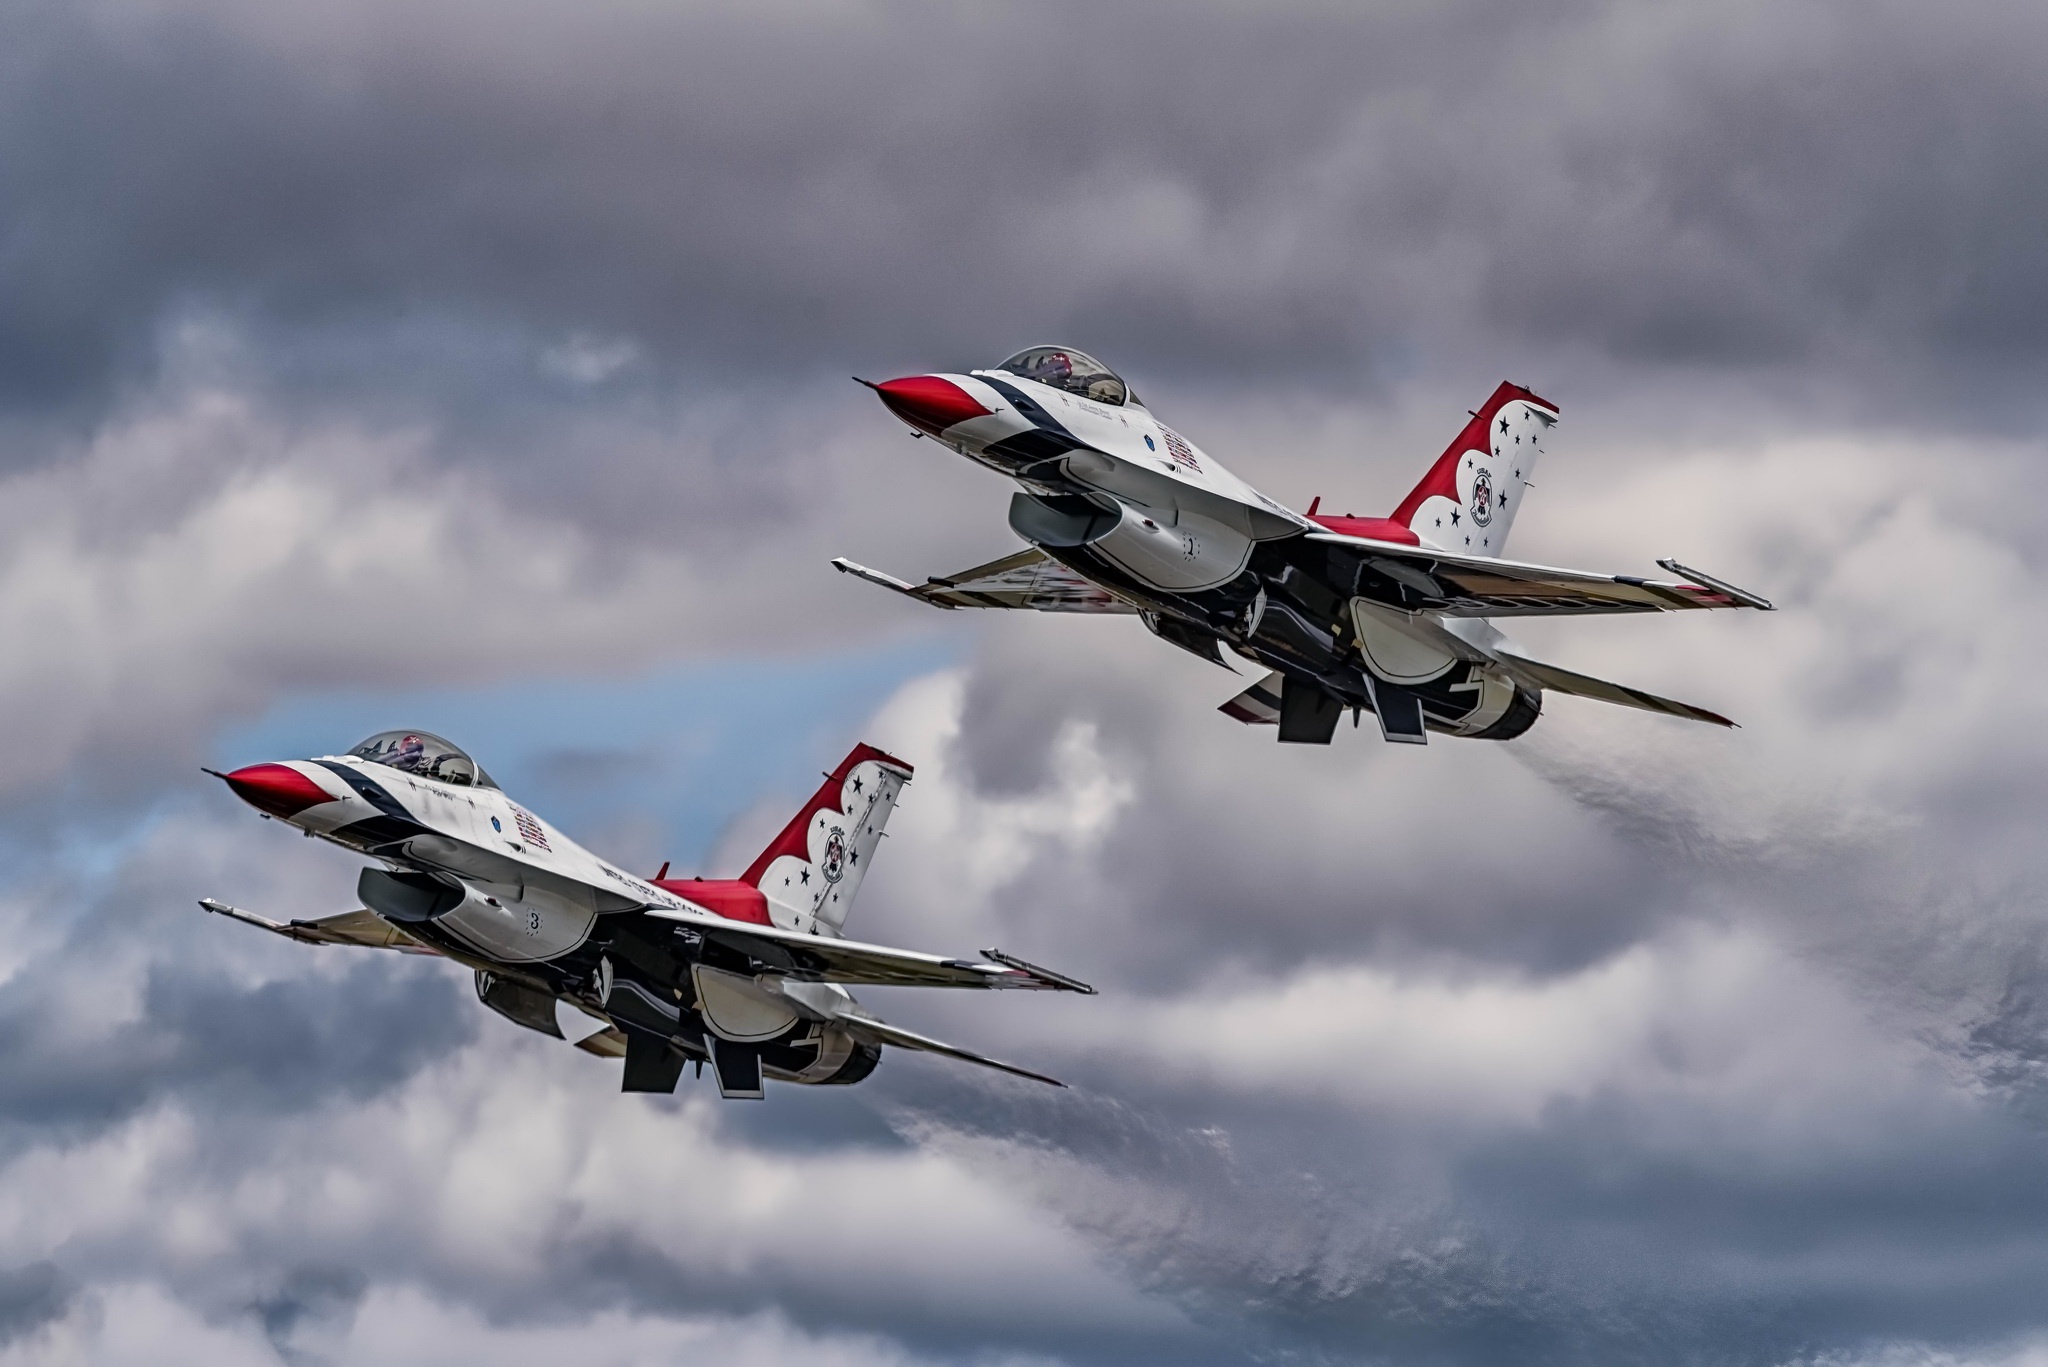 General 2048x1367 aircraft military aircraft General Dynamics F-16 Fighting Falcon thunderbirds US Air Force American aircraft clouds aerobatic team vehicle flying